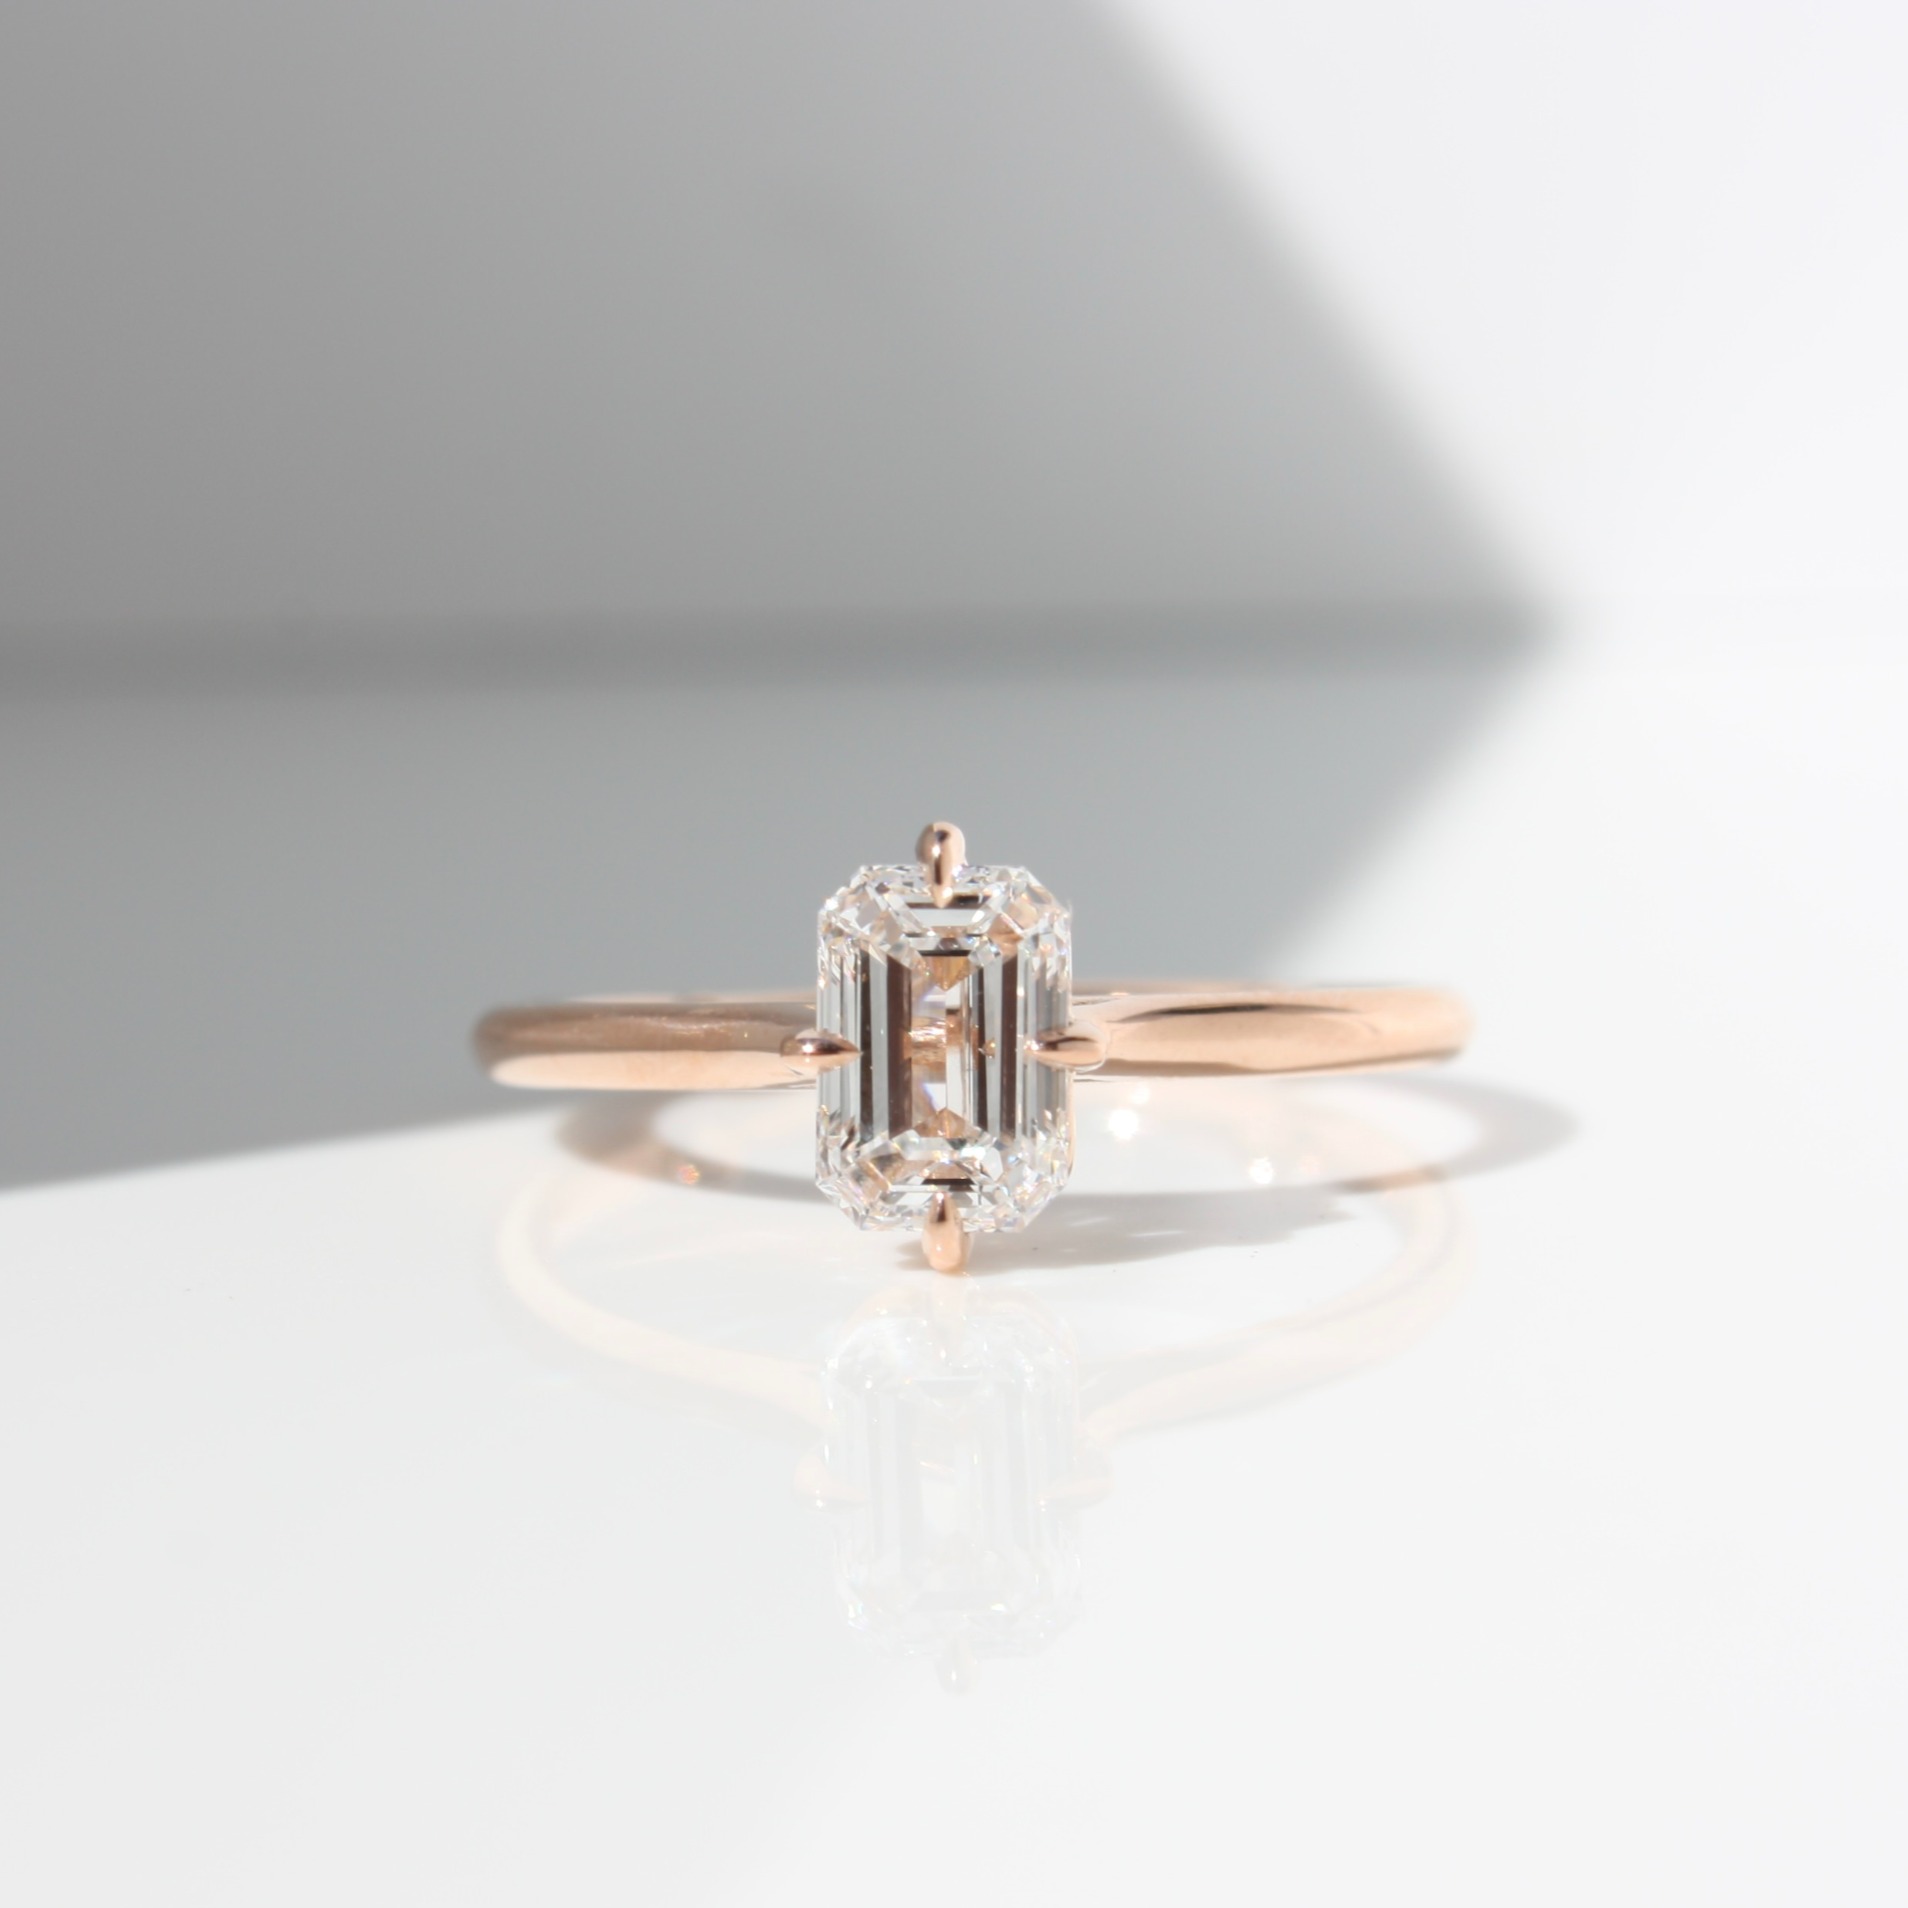 EMERALD CUT COMPASS SOLITAIRE DIAMOND RING, diamond ring, diamond engagement ring, emerald cut diamond, diamond, lab-grown diamond, rose gold ring, compass setting, danielle camera jewellery, The Ultimate Engagement Ring Guide for Men